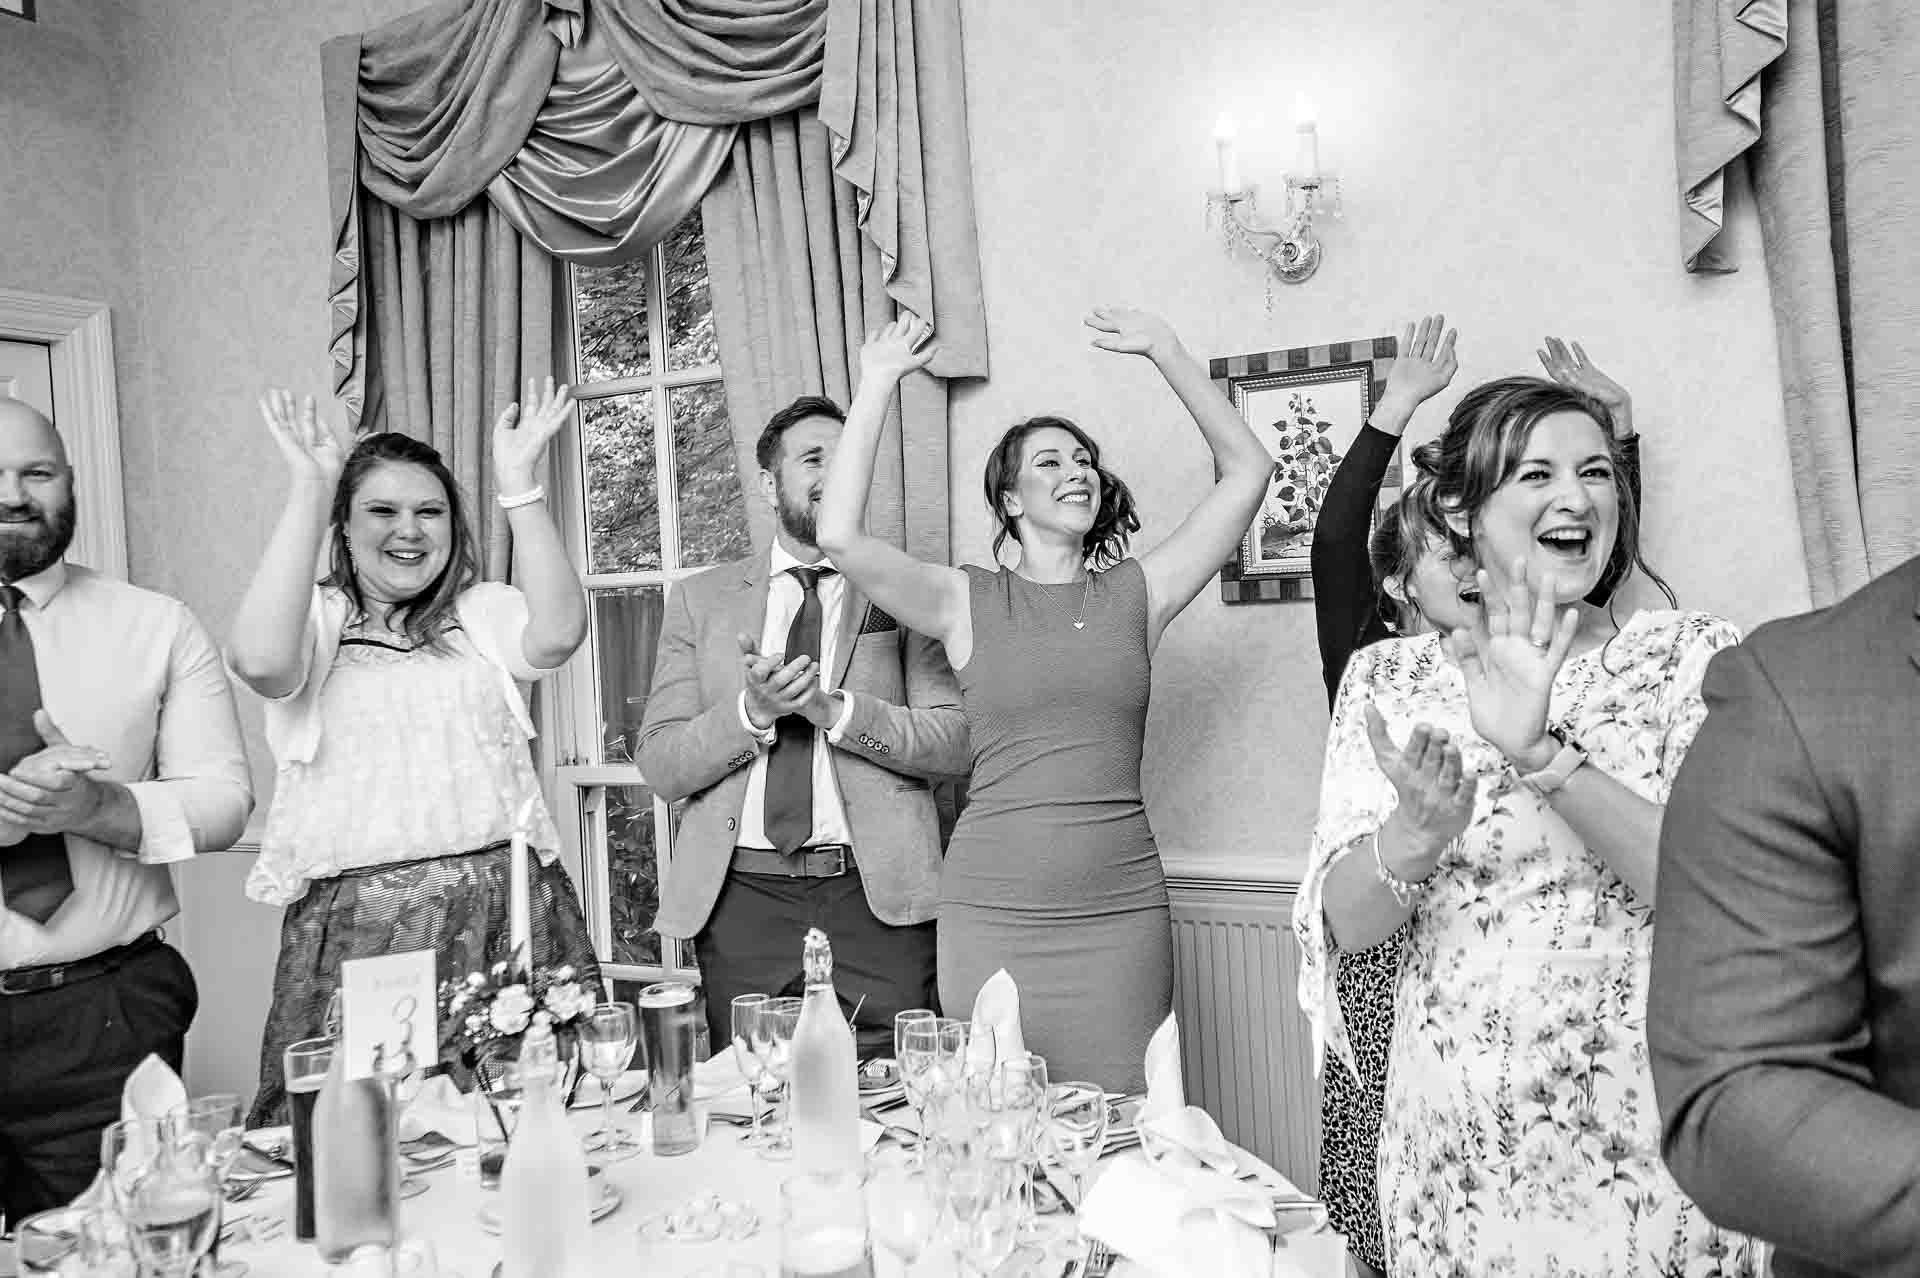 Guests cheering and clapping couple at wedding in Cardiff